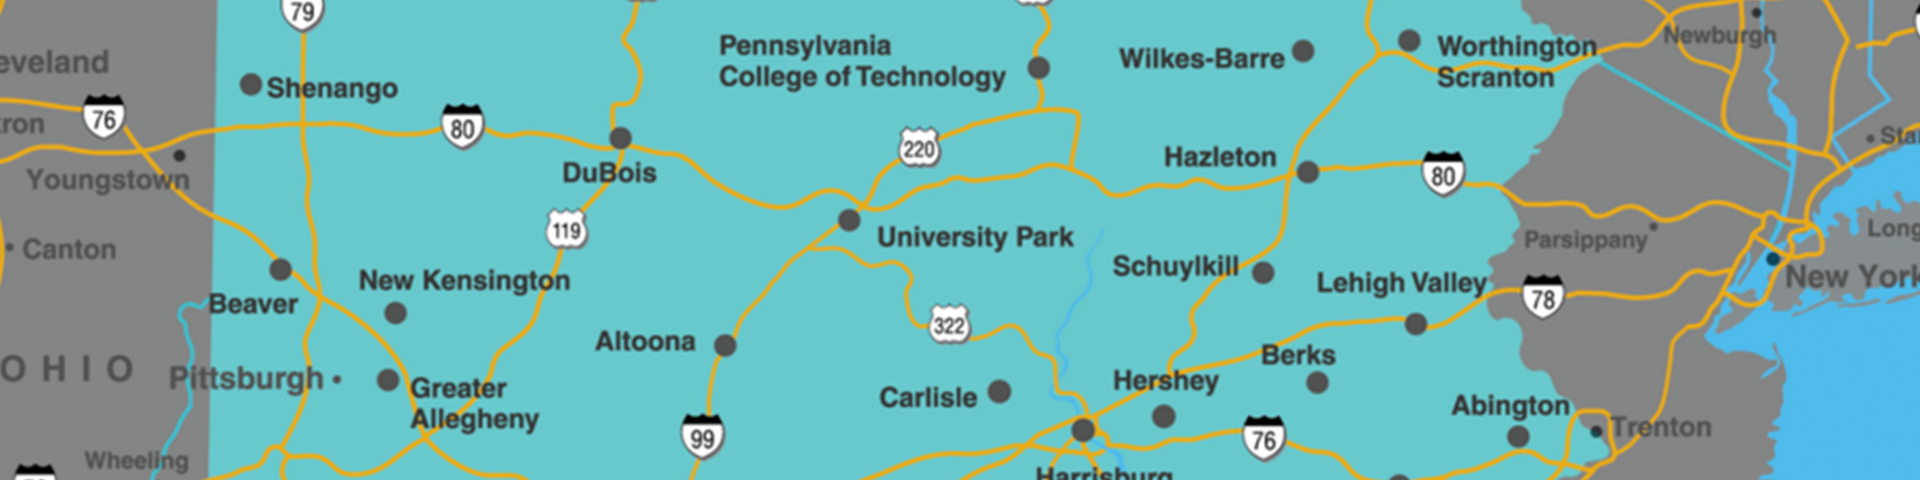 Map of Pennsylvania and Penn State campuses